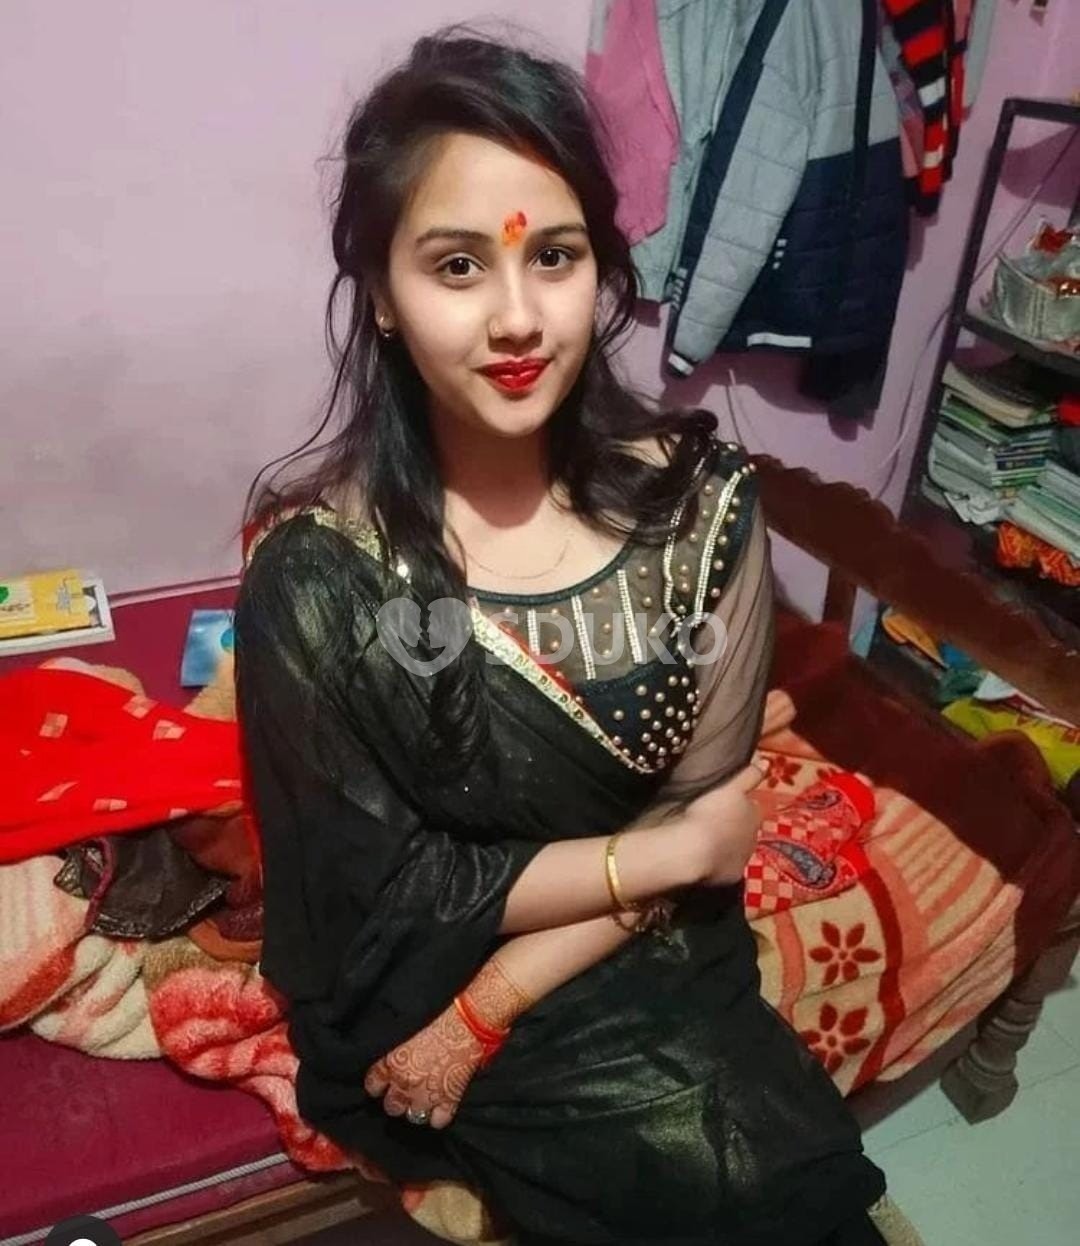 HYDERABAD_TODAY LOW PRICE_GENUINE SERVICE ALL TYPE GIRLS AVAILABLE_NEW GOOD LOOKING STAFF AVAILABLE CALL ME